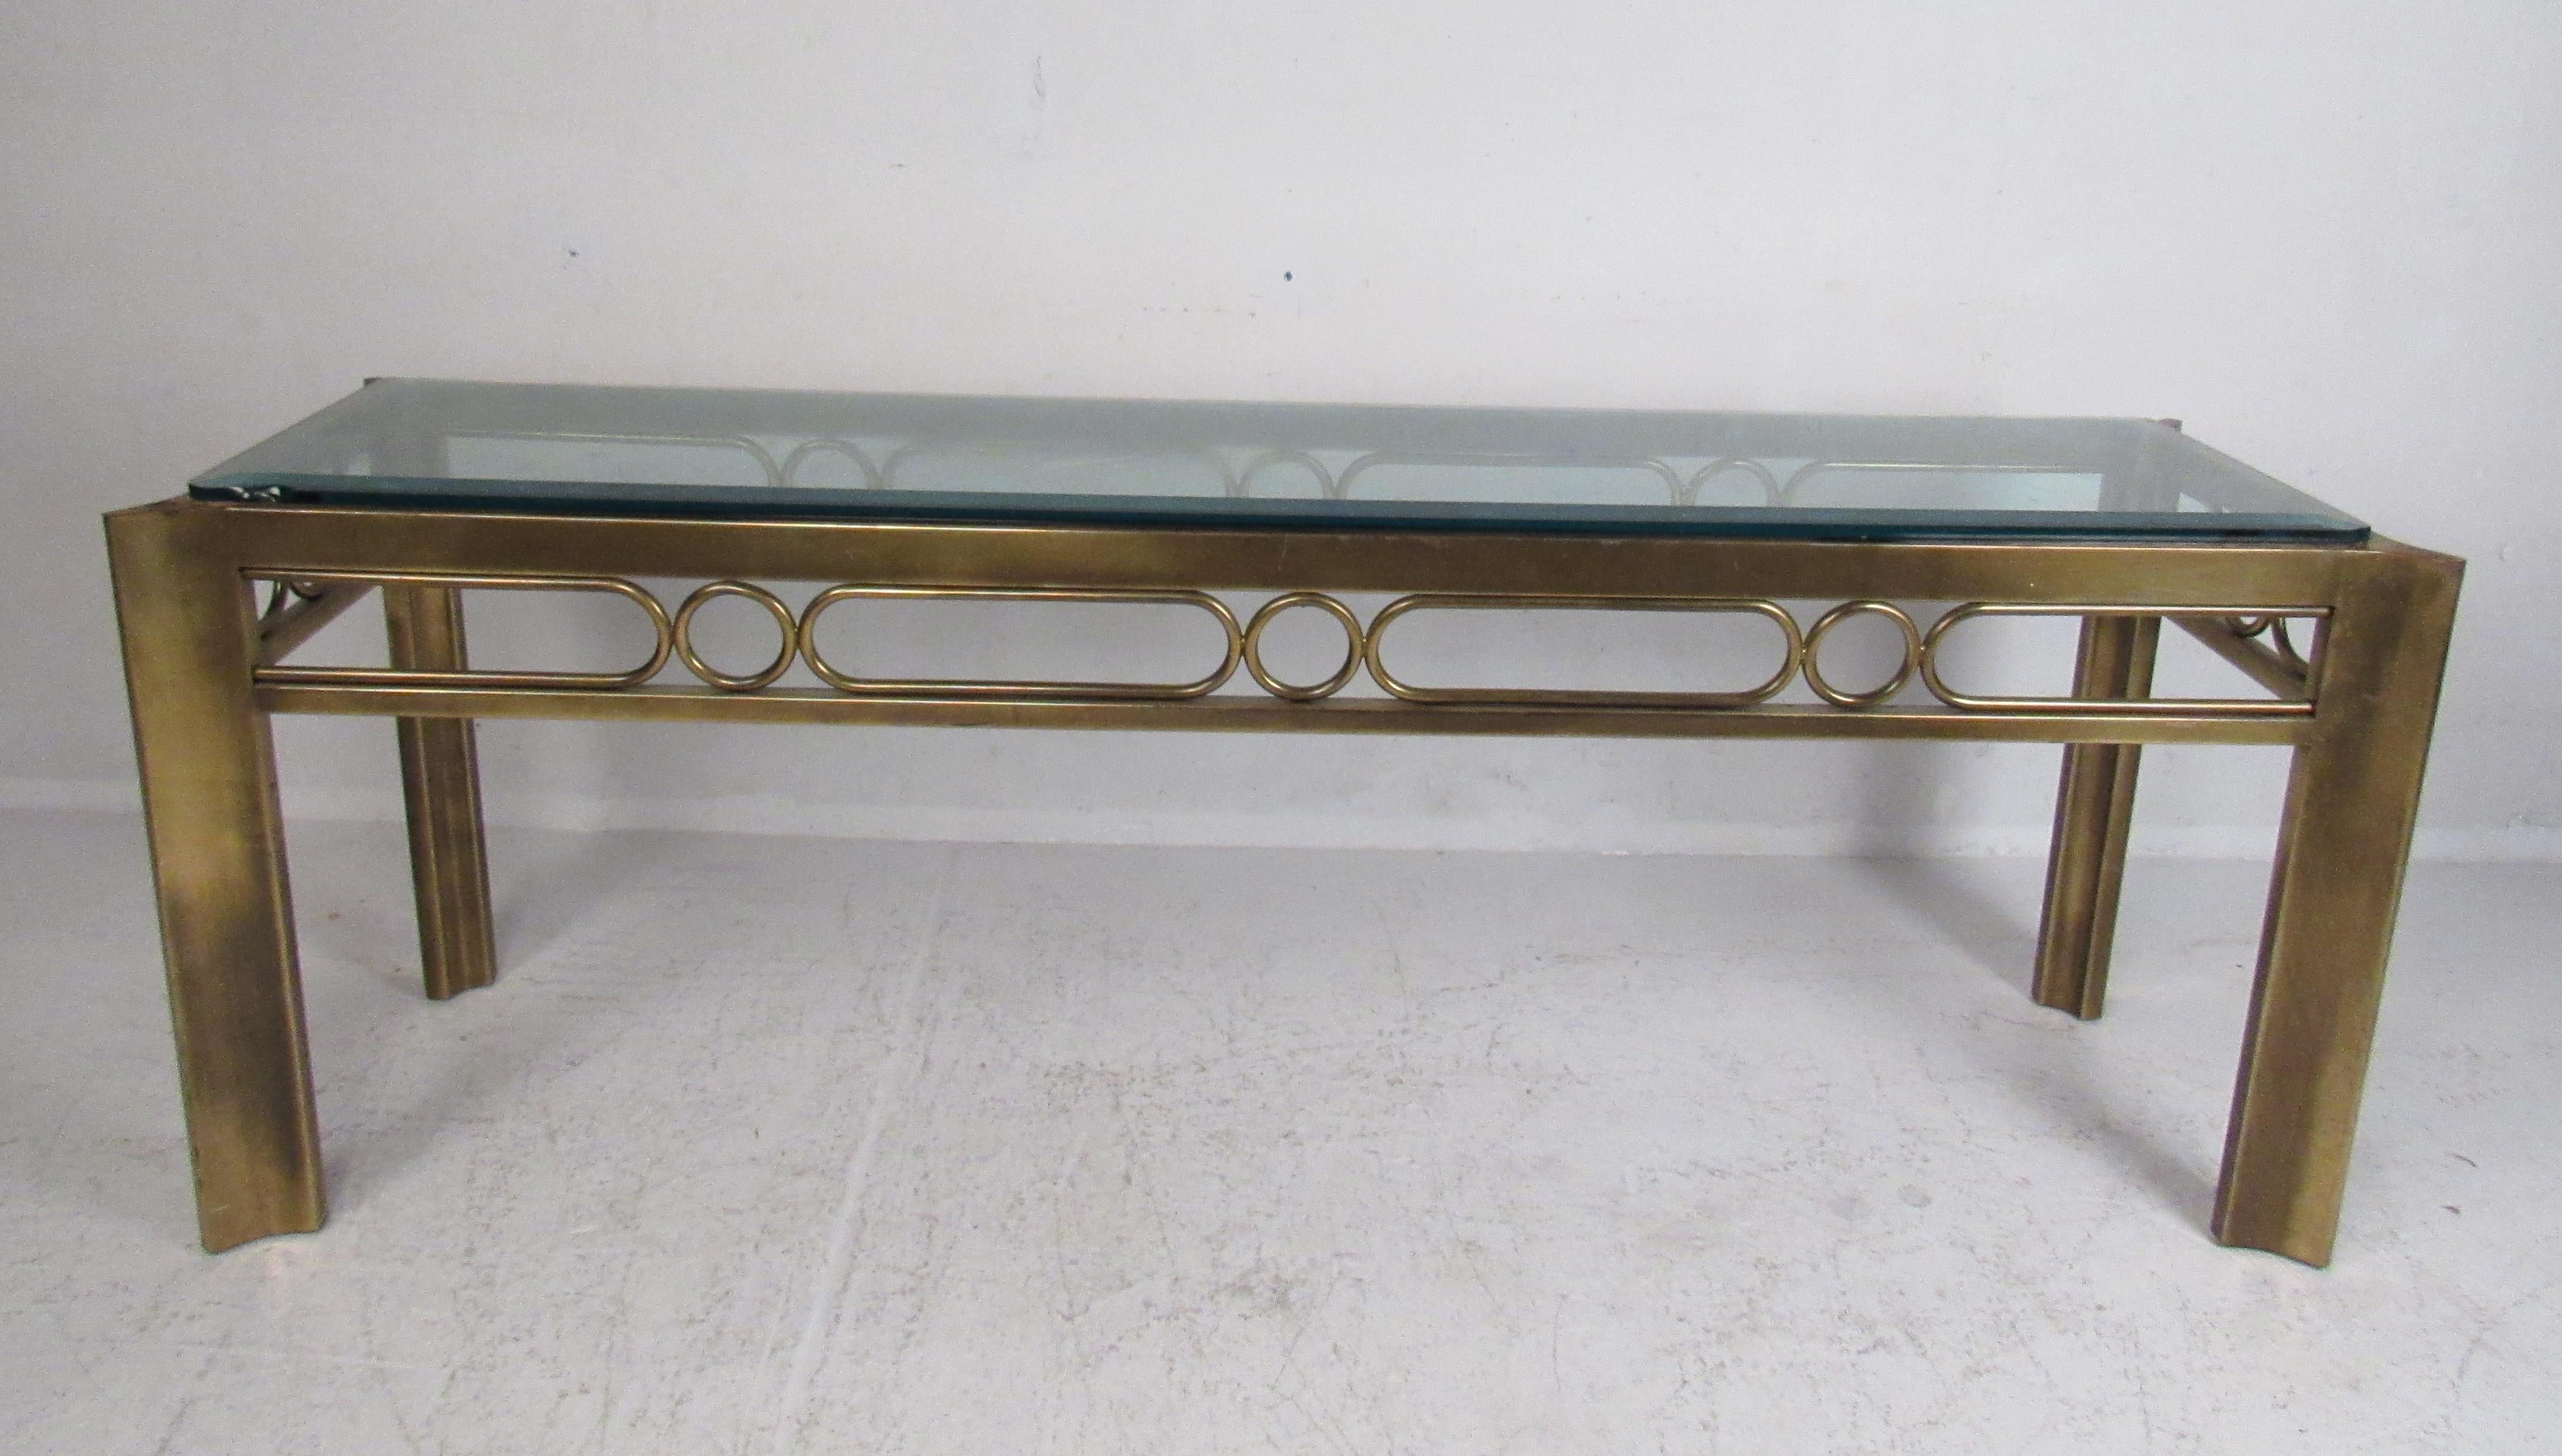 Vintage Modern Mastercraft Trilobi Console Table In Good Condition For Sale In Brooklyn, NY